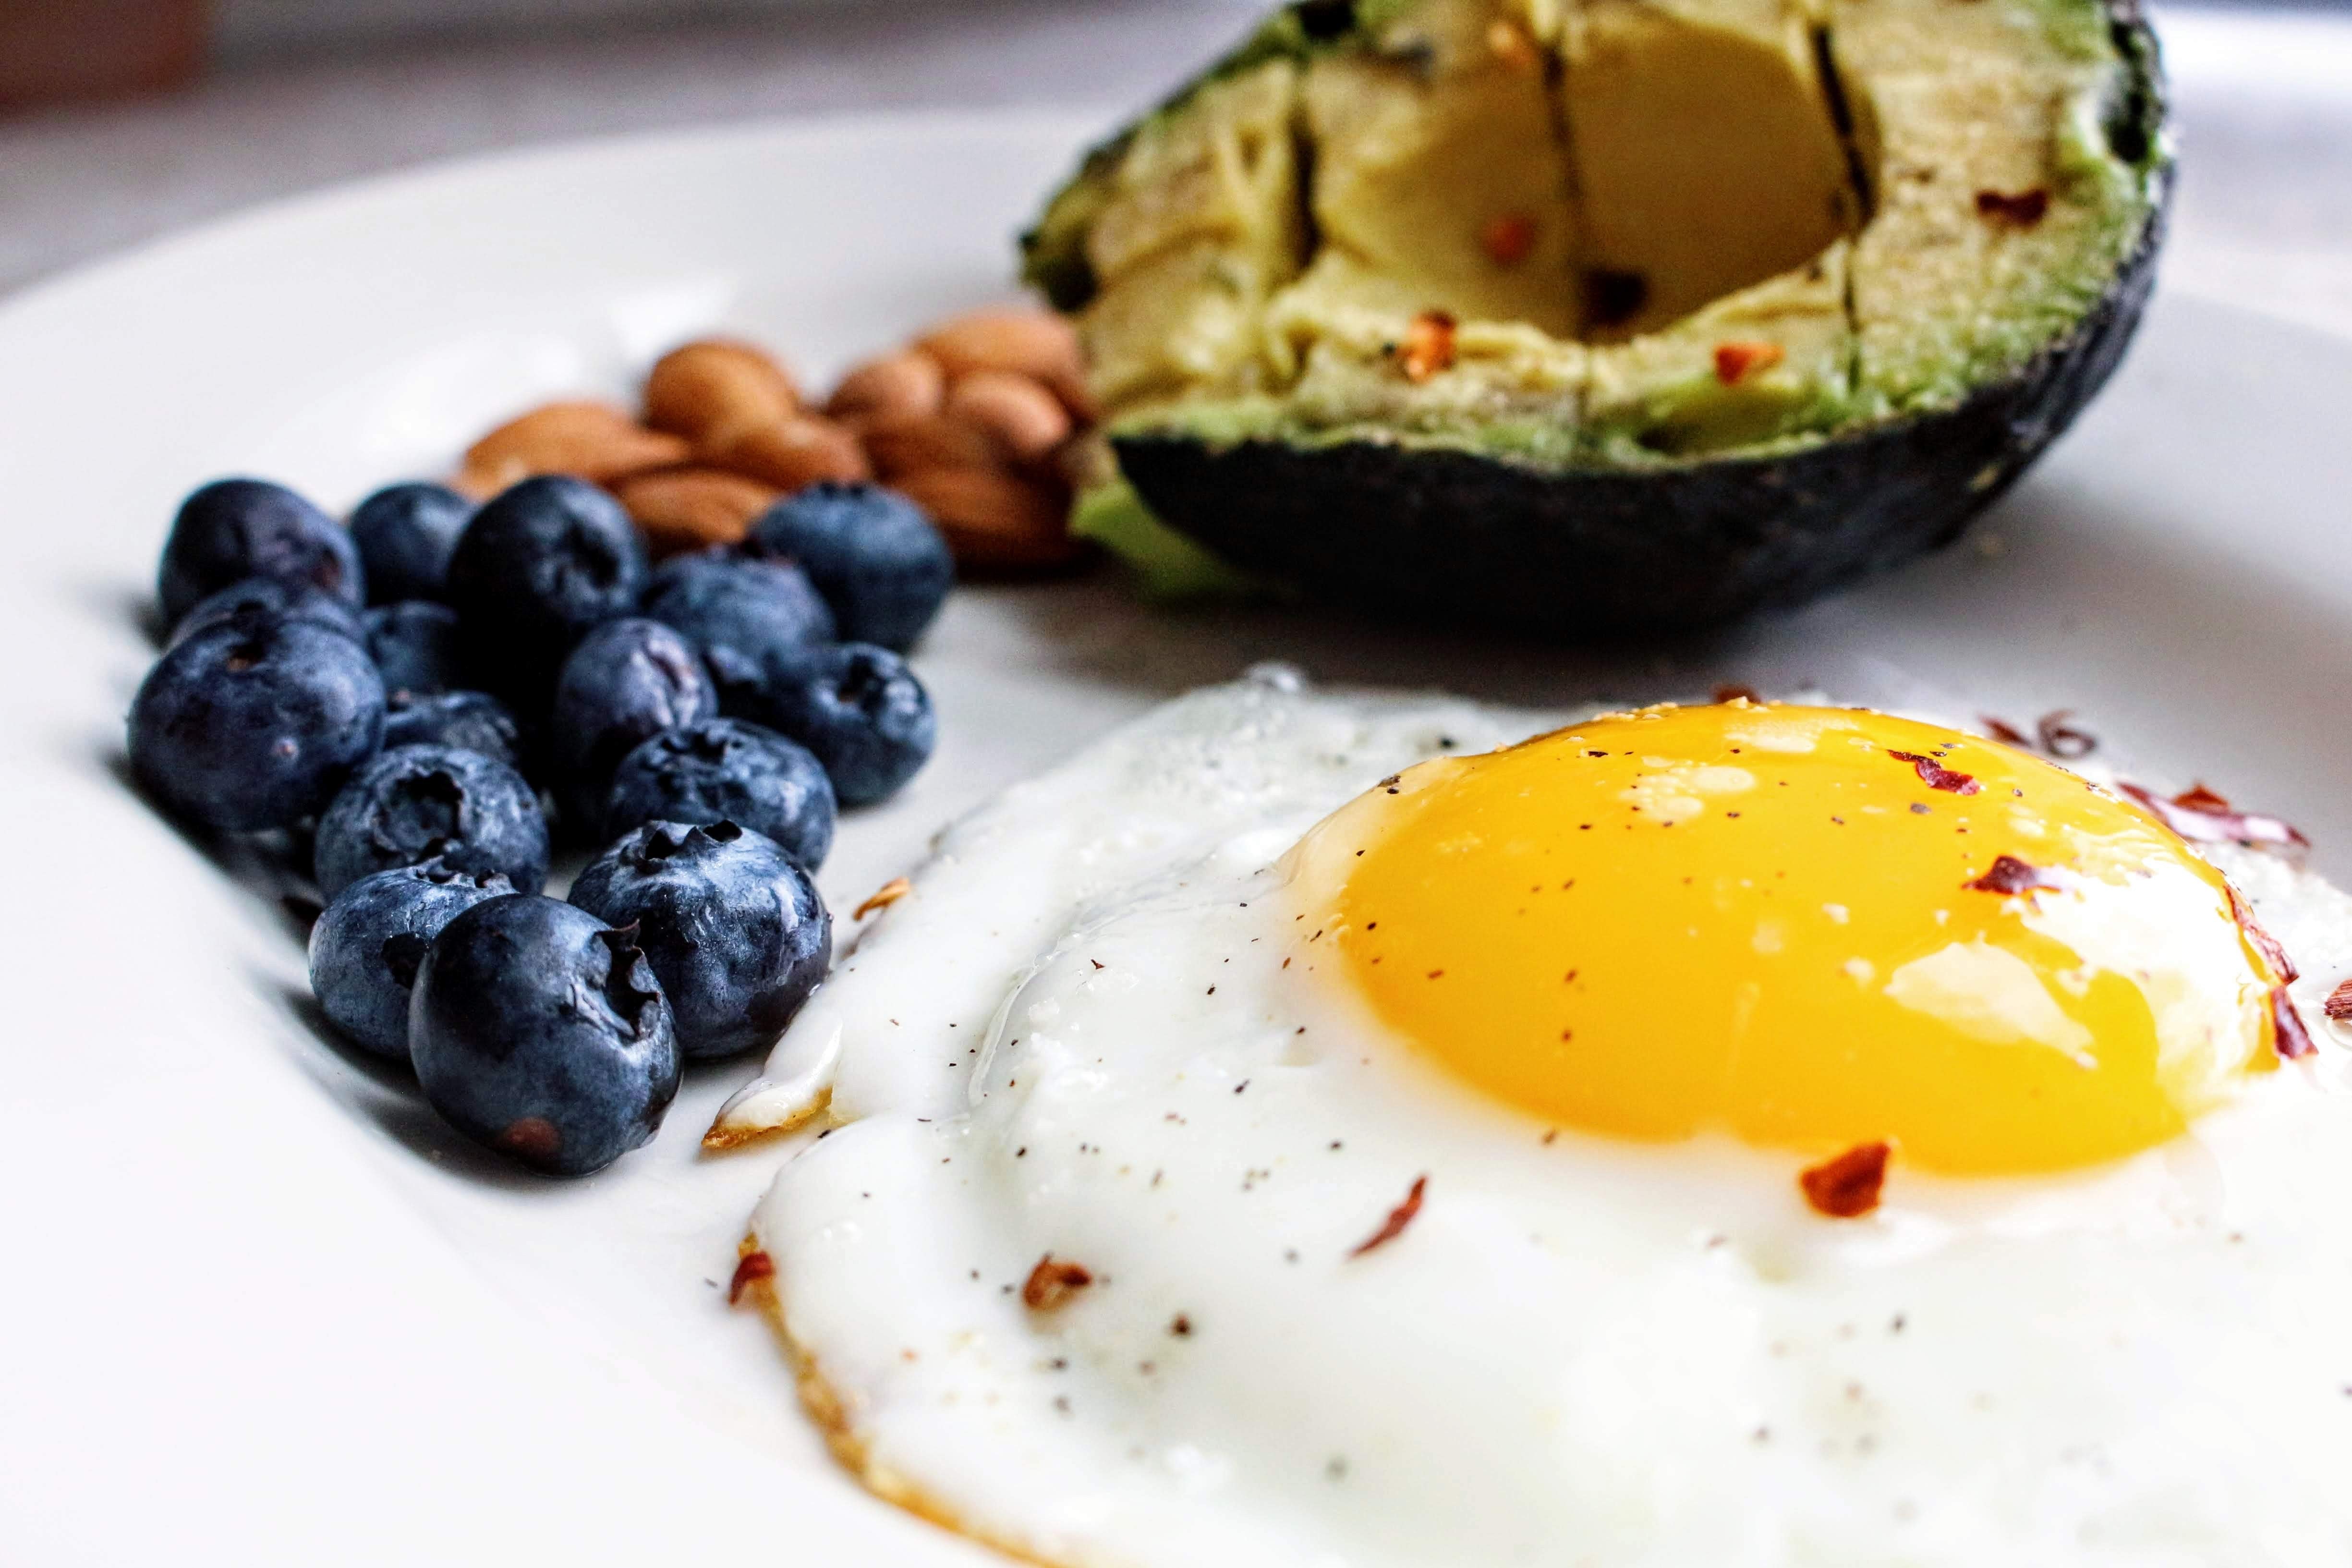 The Best Guide to Keto Diet: How to Get Started and Achieve Results